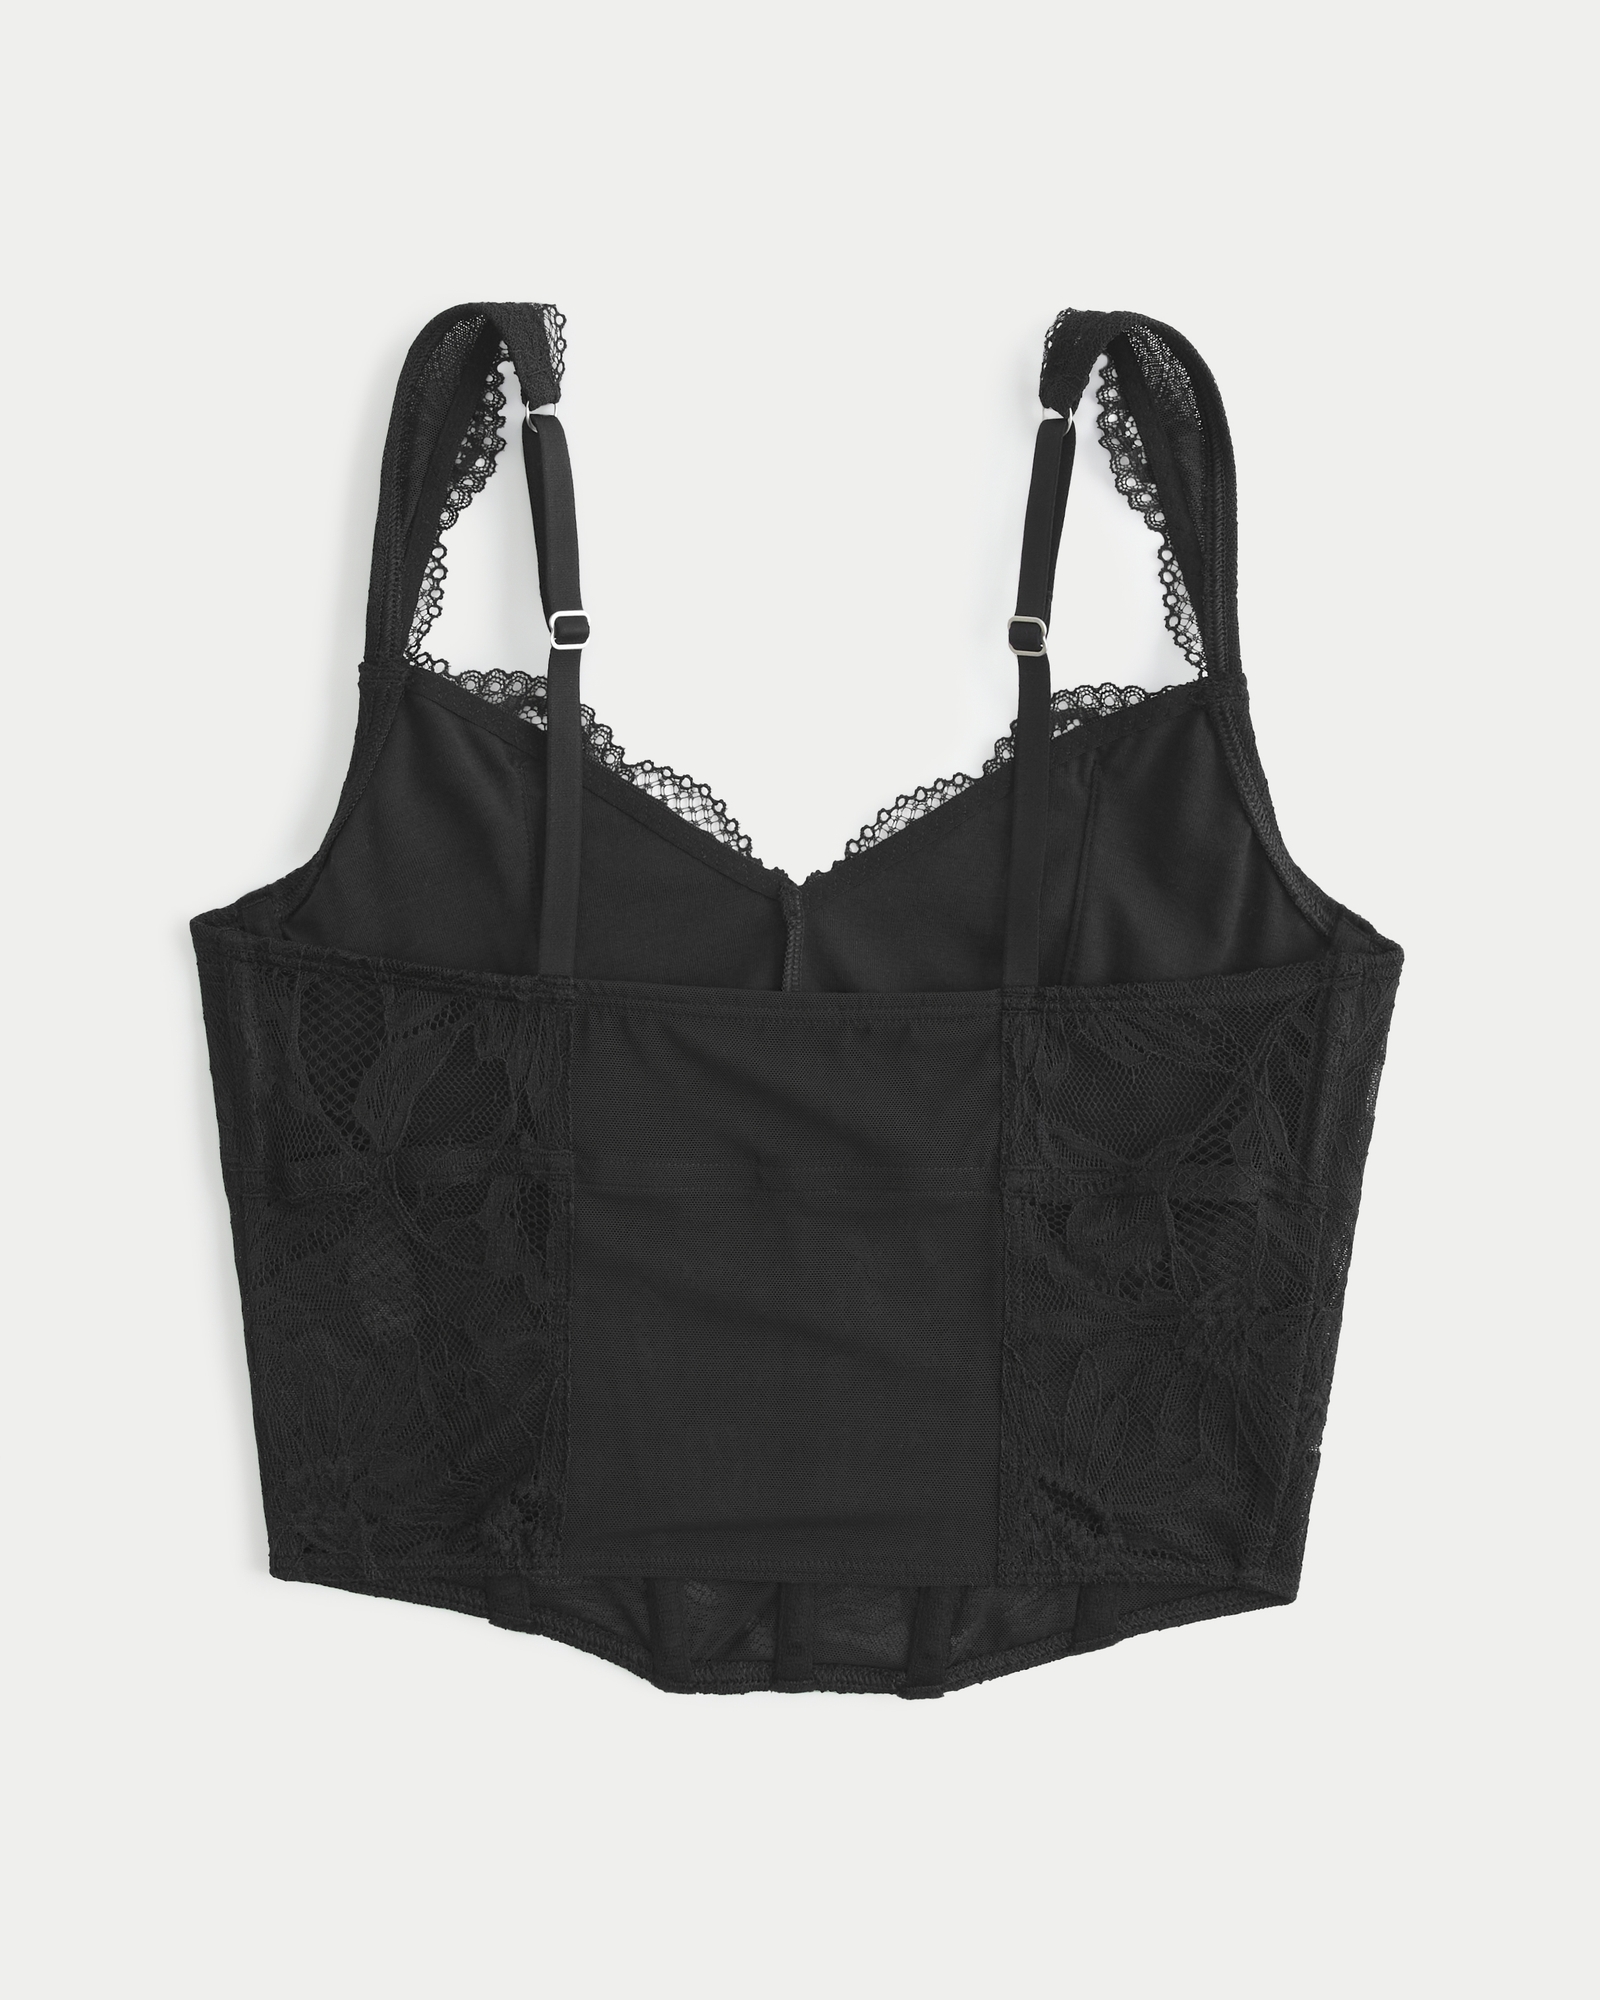 Hollister Gilly Hicks Lace Trim Satin Triangle Bralette in Black